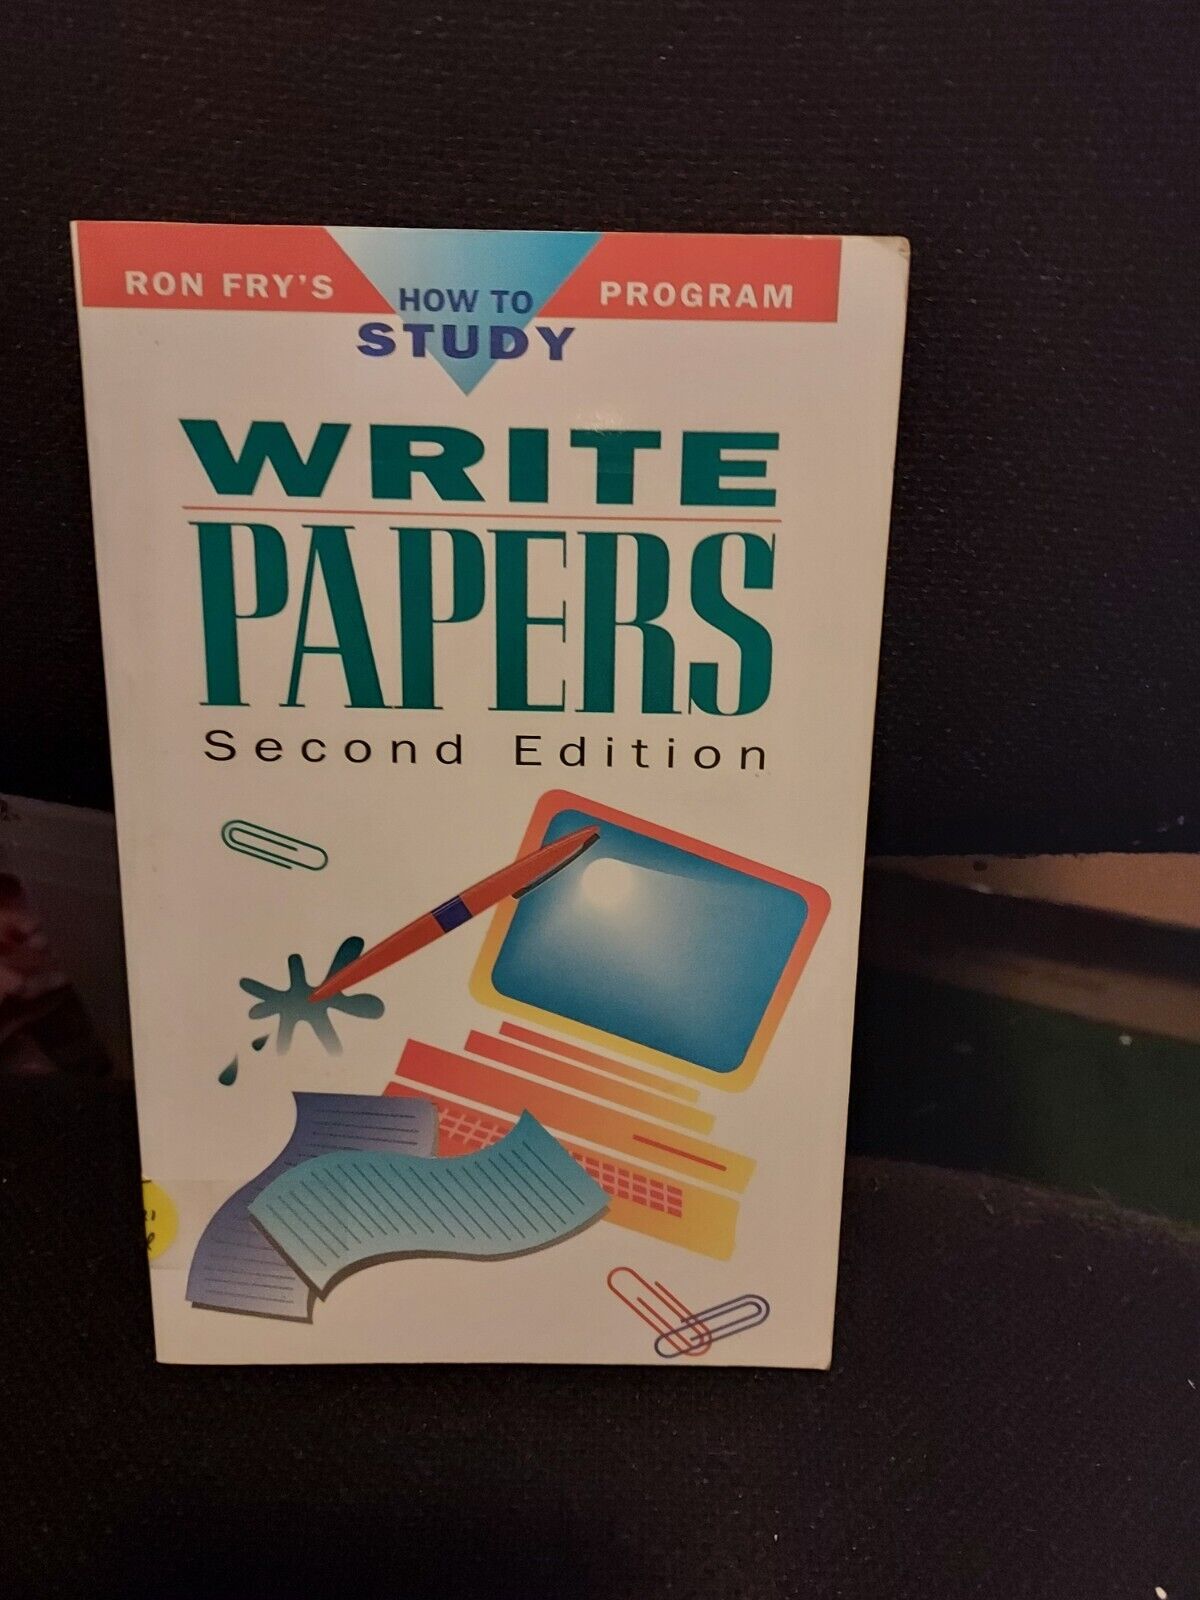 How to Study Ser.: Write Papers by Ron Fry (1994, Trade Paperback) 2nd Ed. H1B